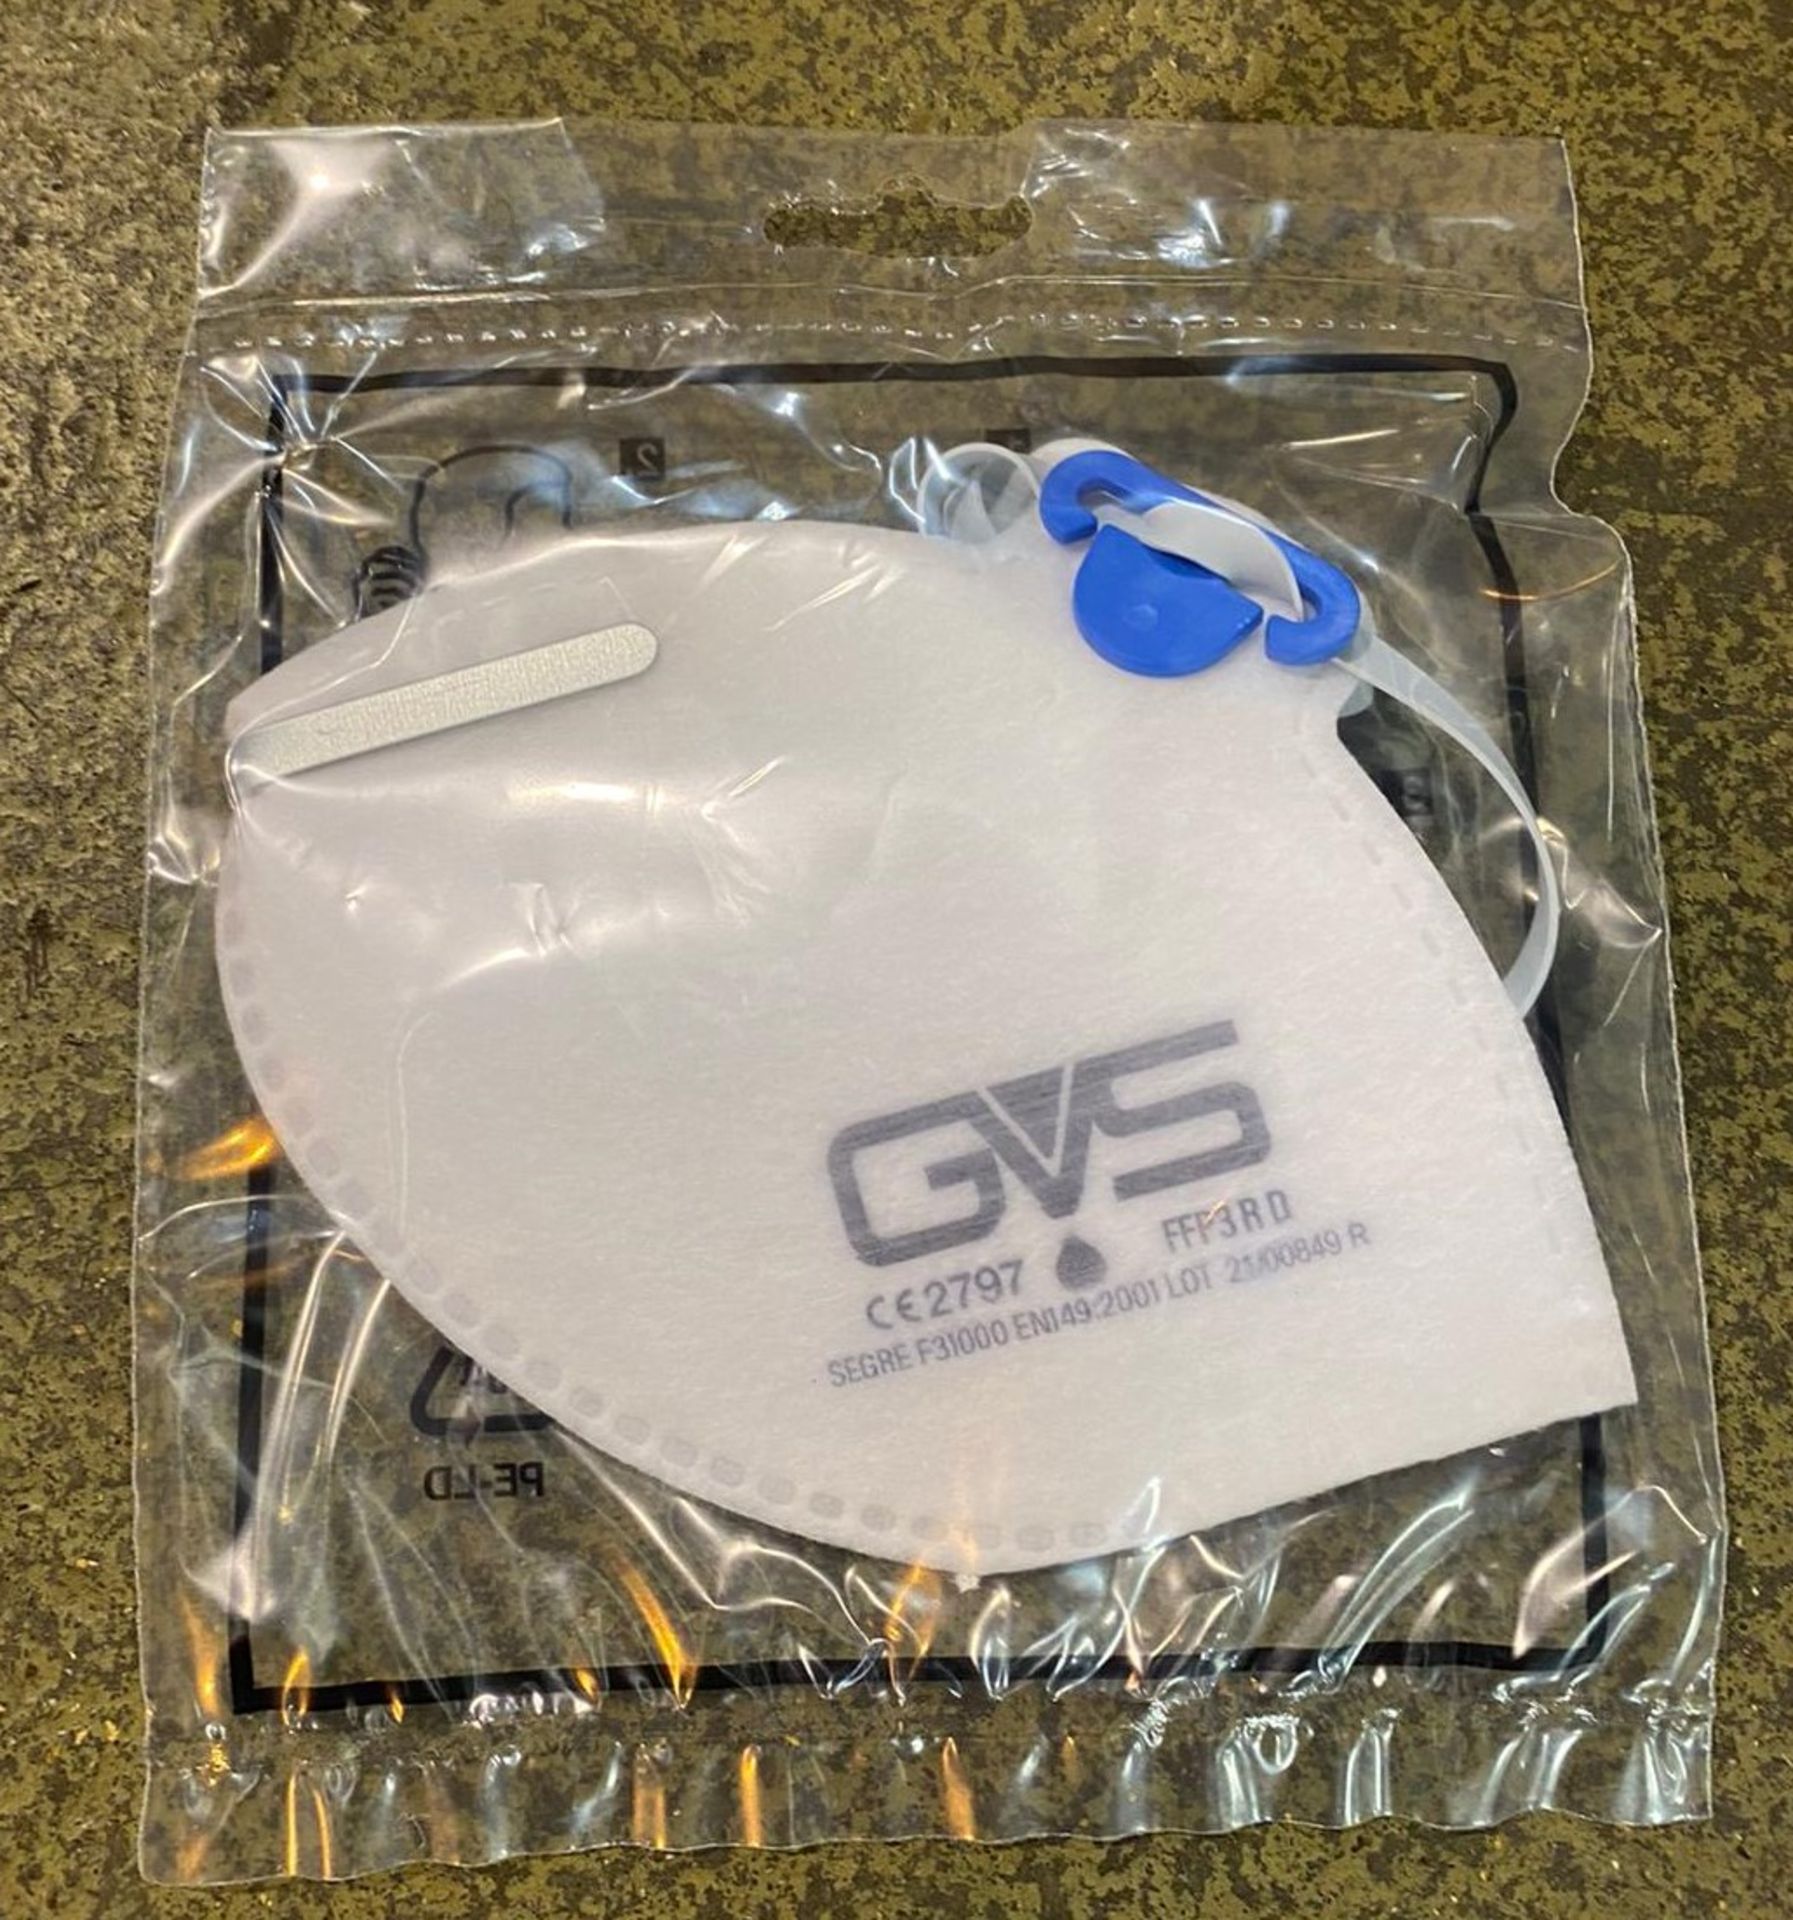 1,200 x GVS Resparitory Face Masks - FFP3 Folded and Adjustable Masks Individually Wrapped - Image 5 of 9